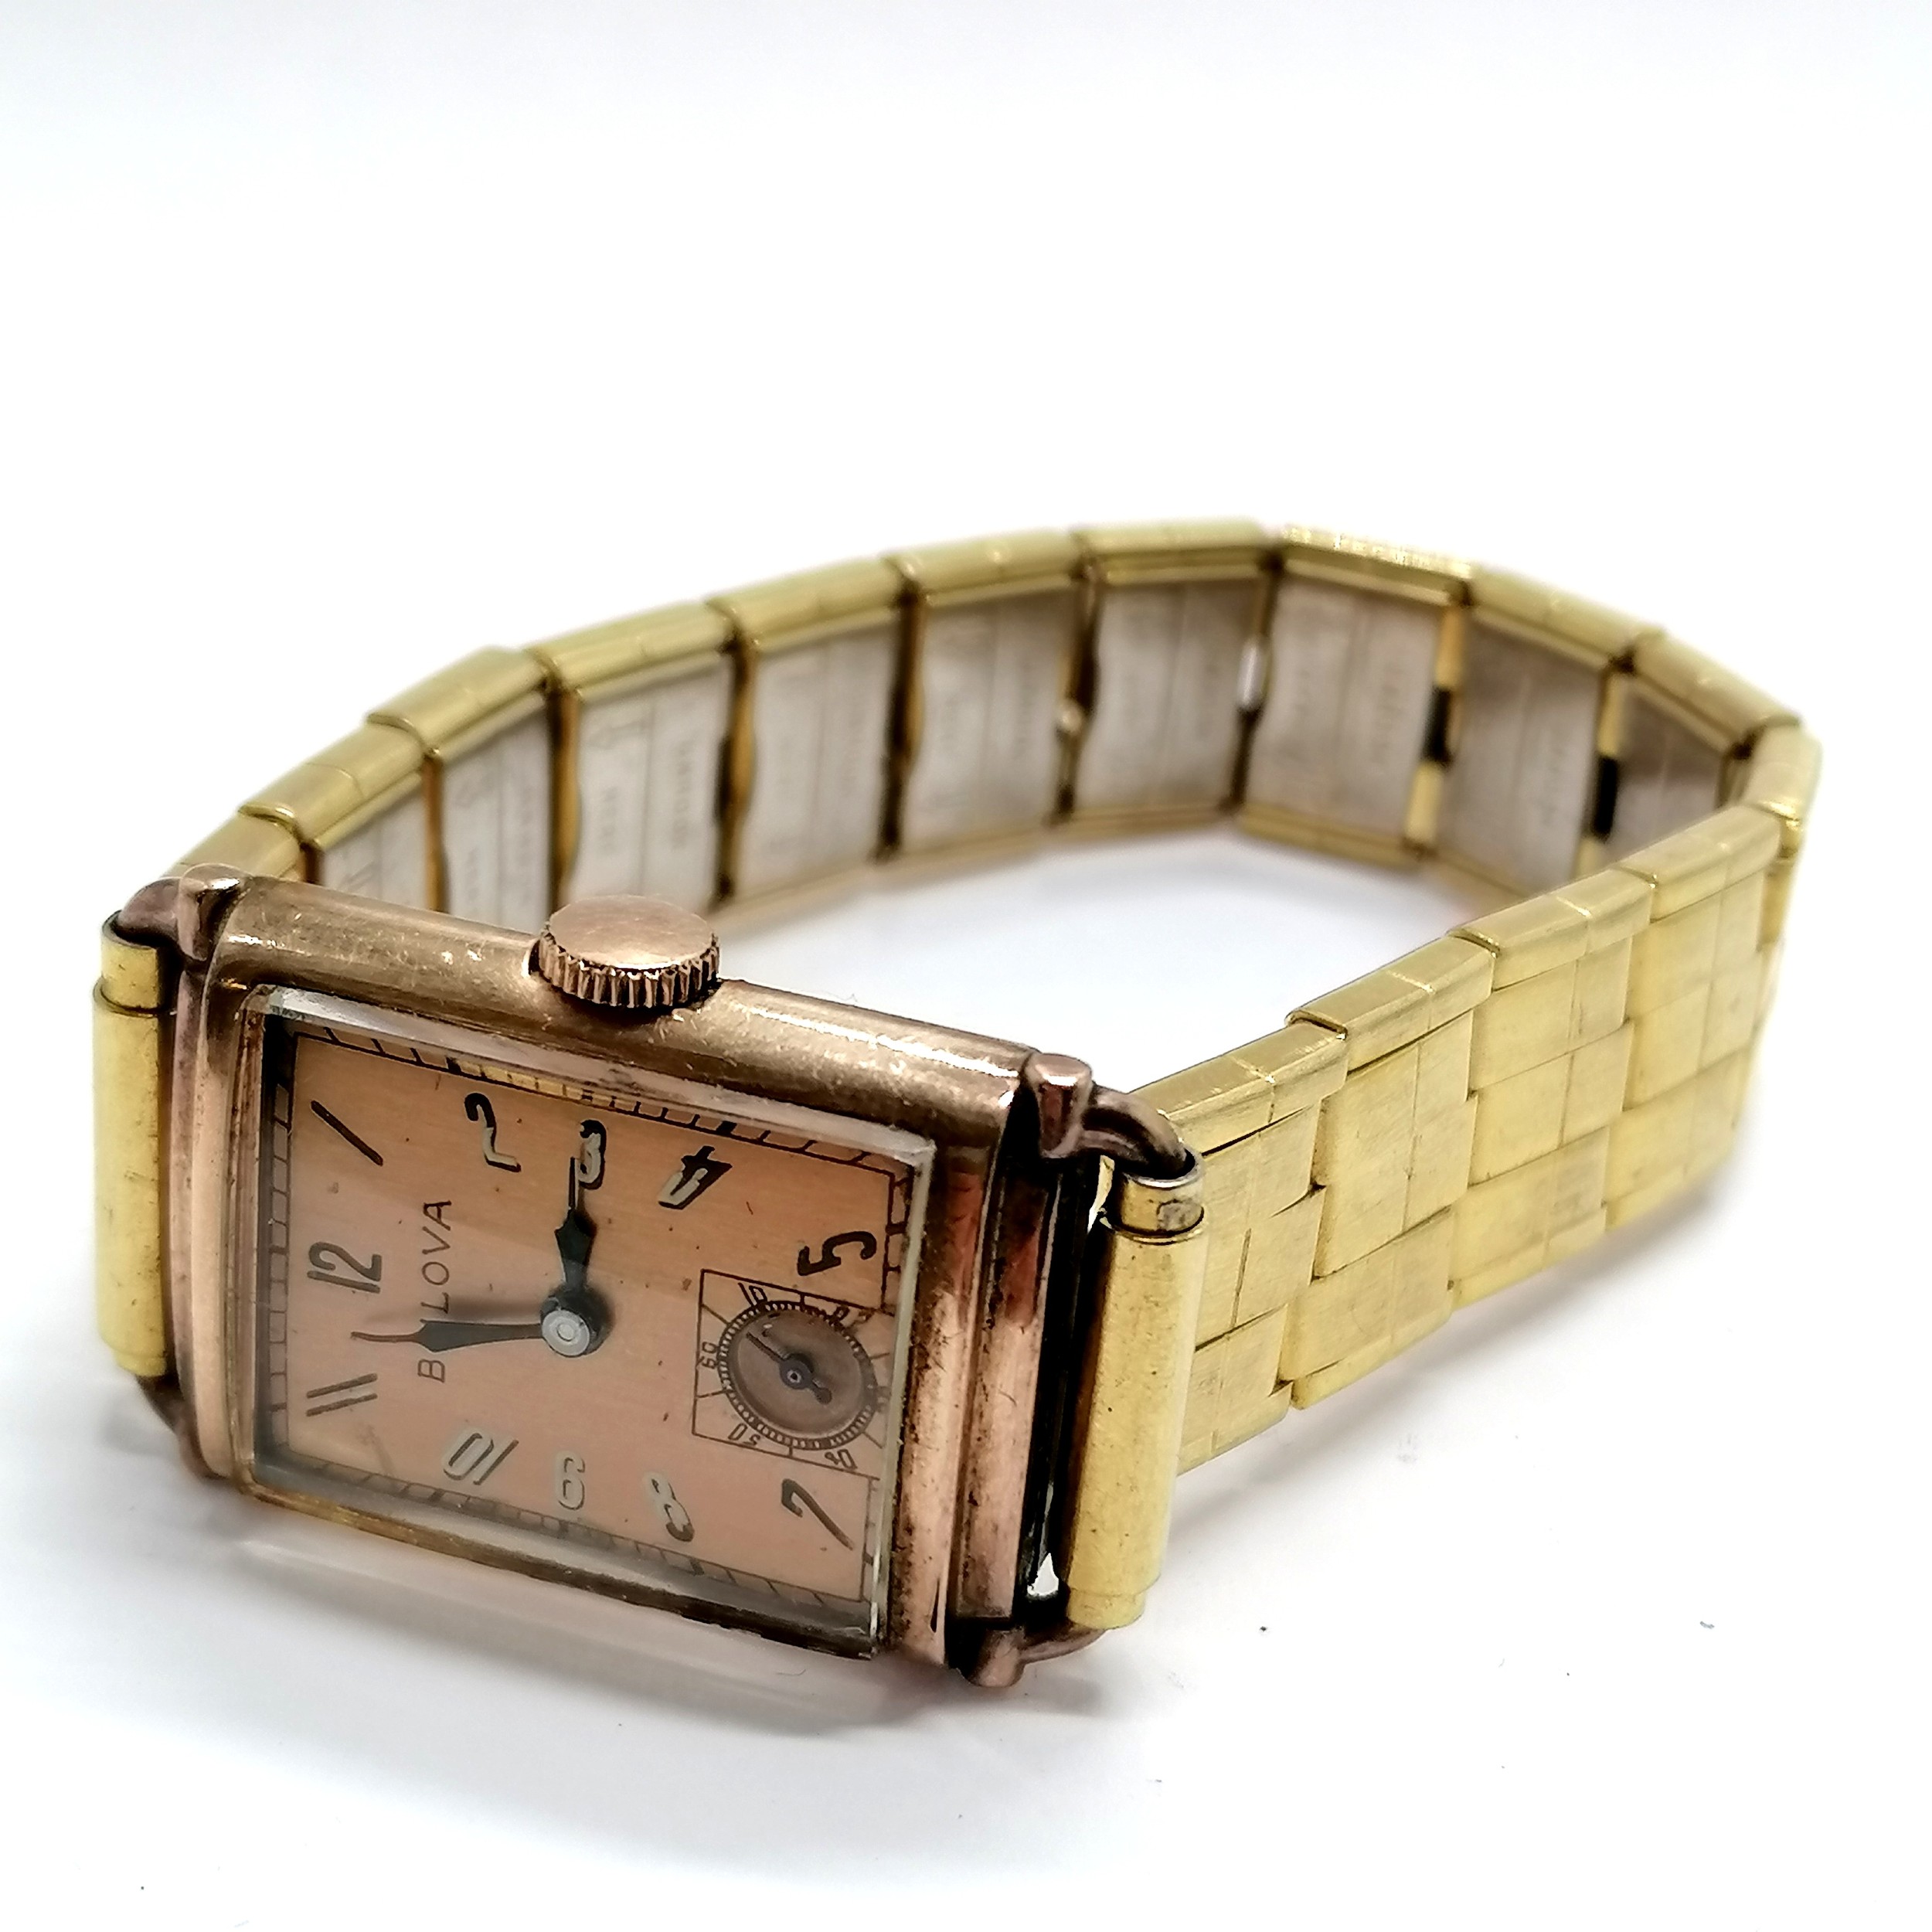 Bulova Art Deco manual wind wristwatch in a 14ct gold filled case on a sprung gold plated bracelet - - Image 2 of 3